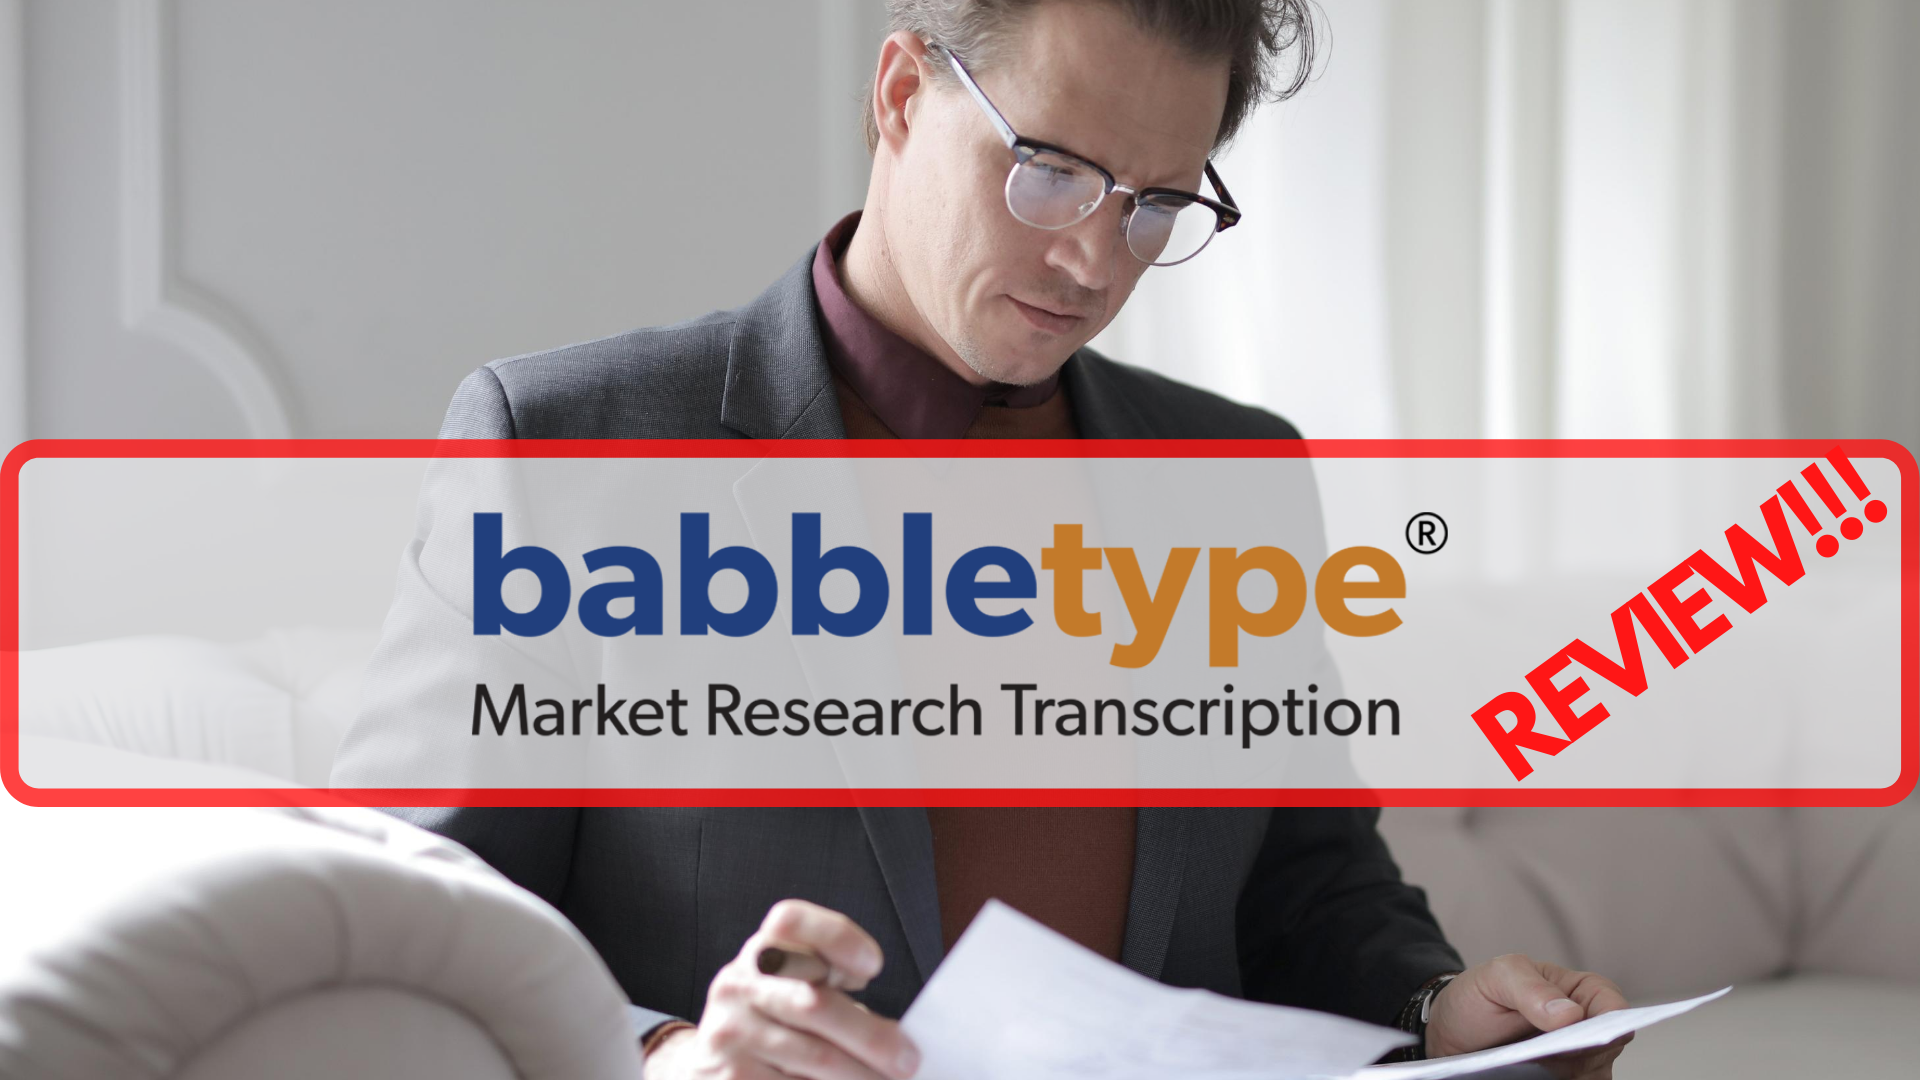 Is Babbletype a scam